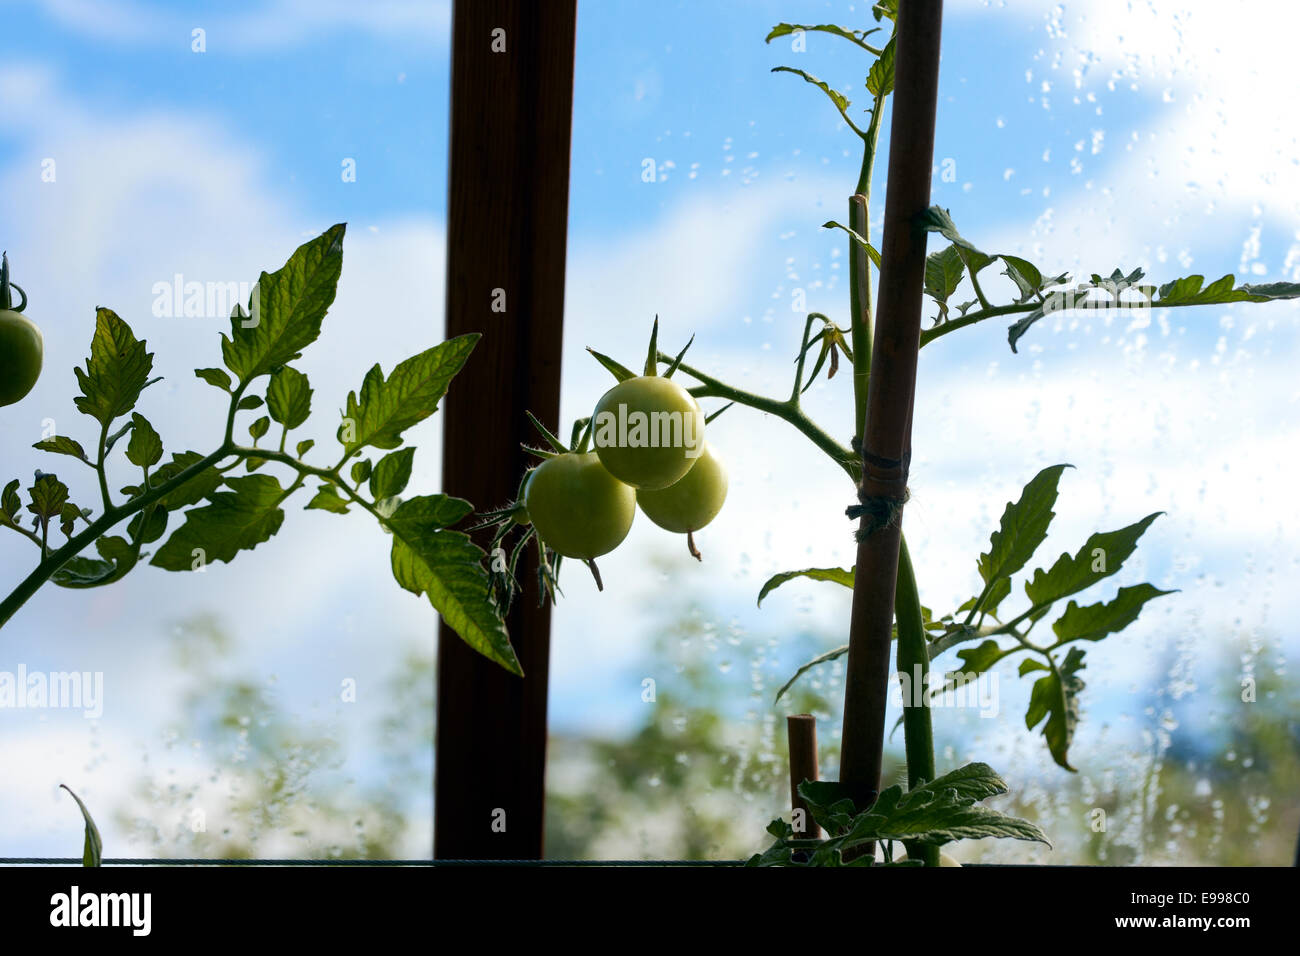 Unripe tomatoes in a greenhouse Stock Photo